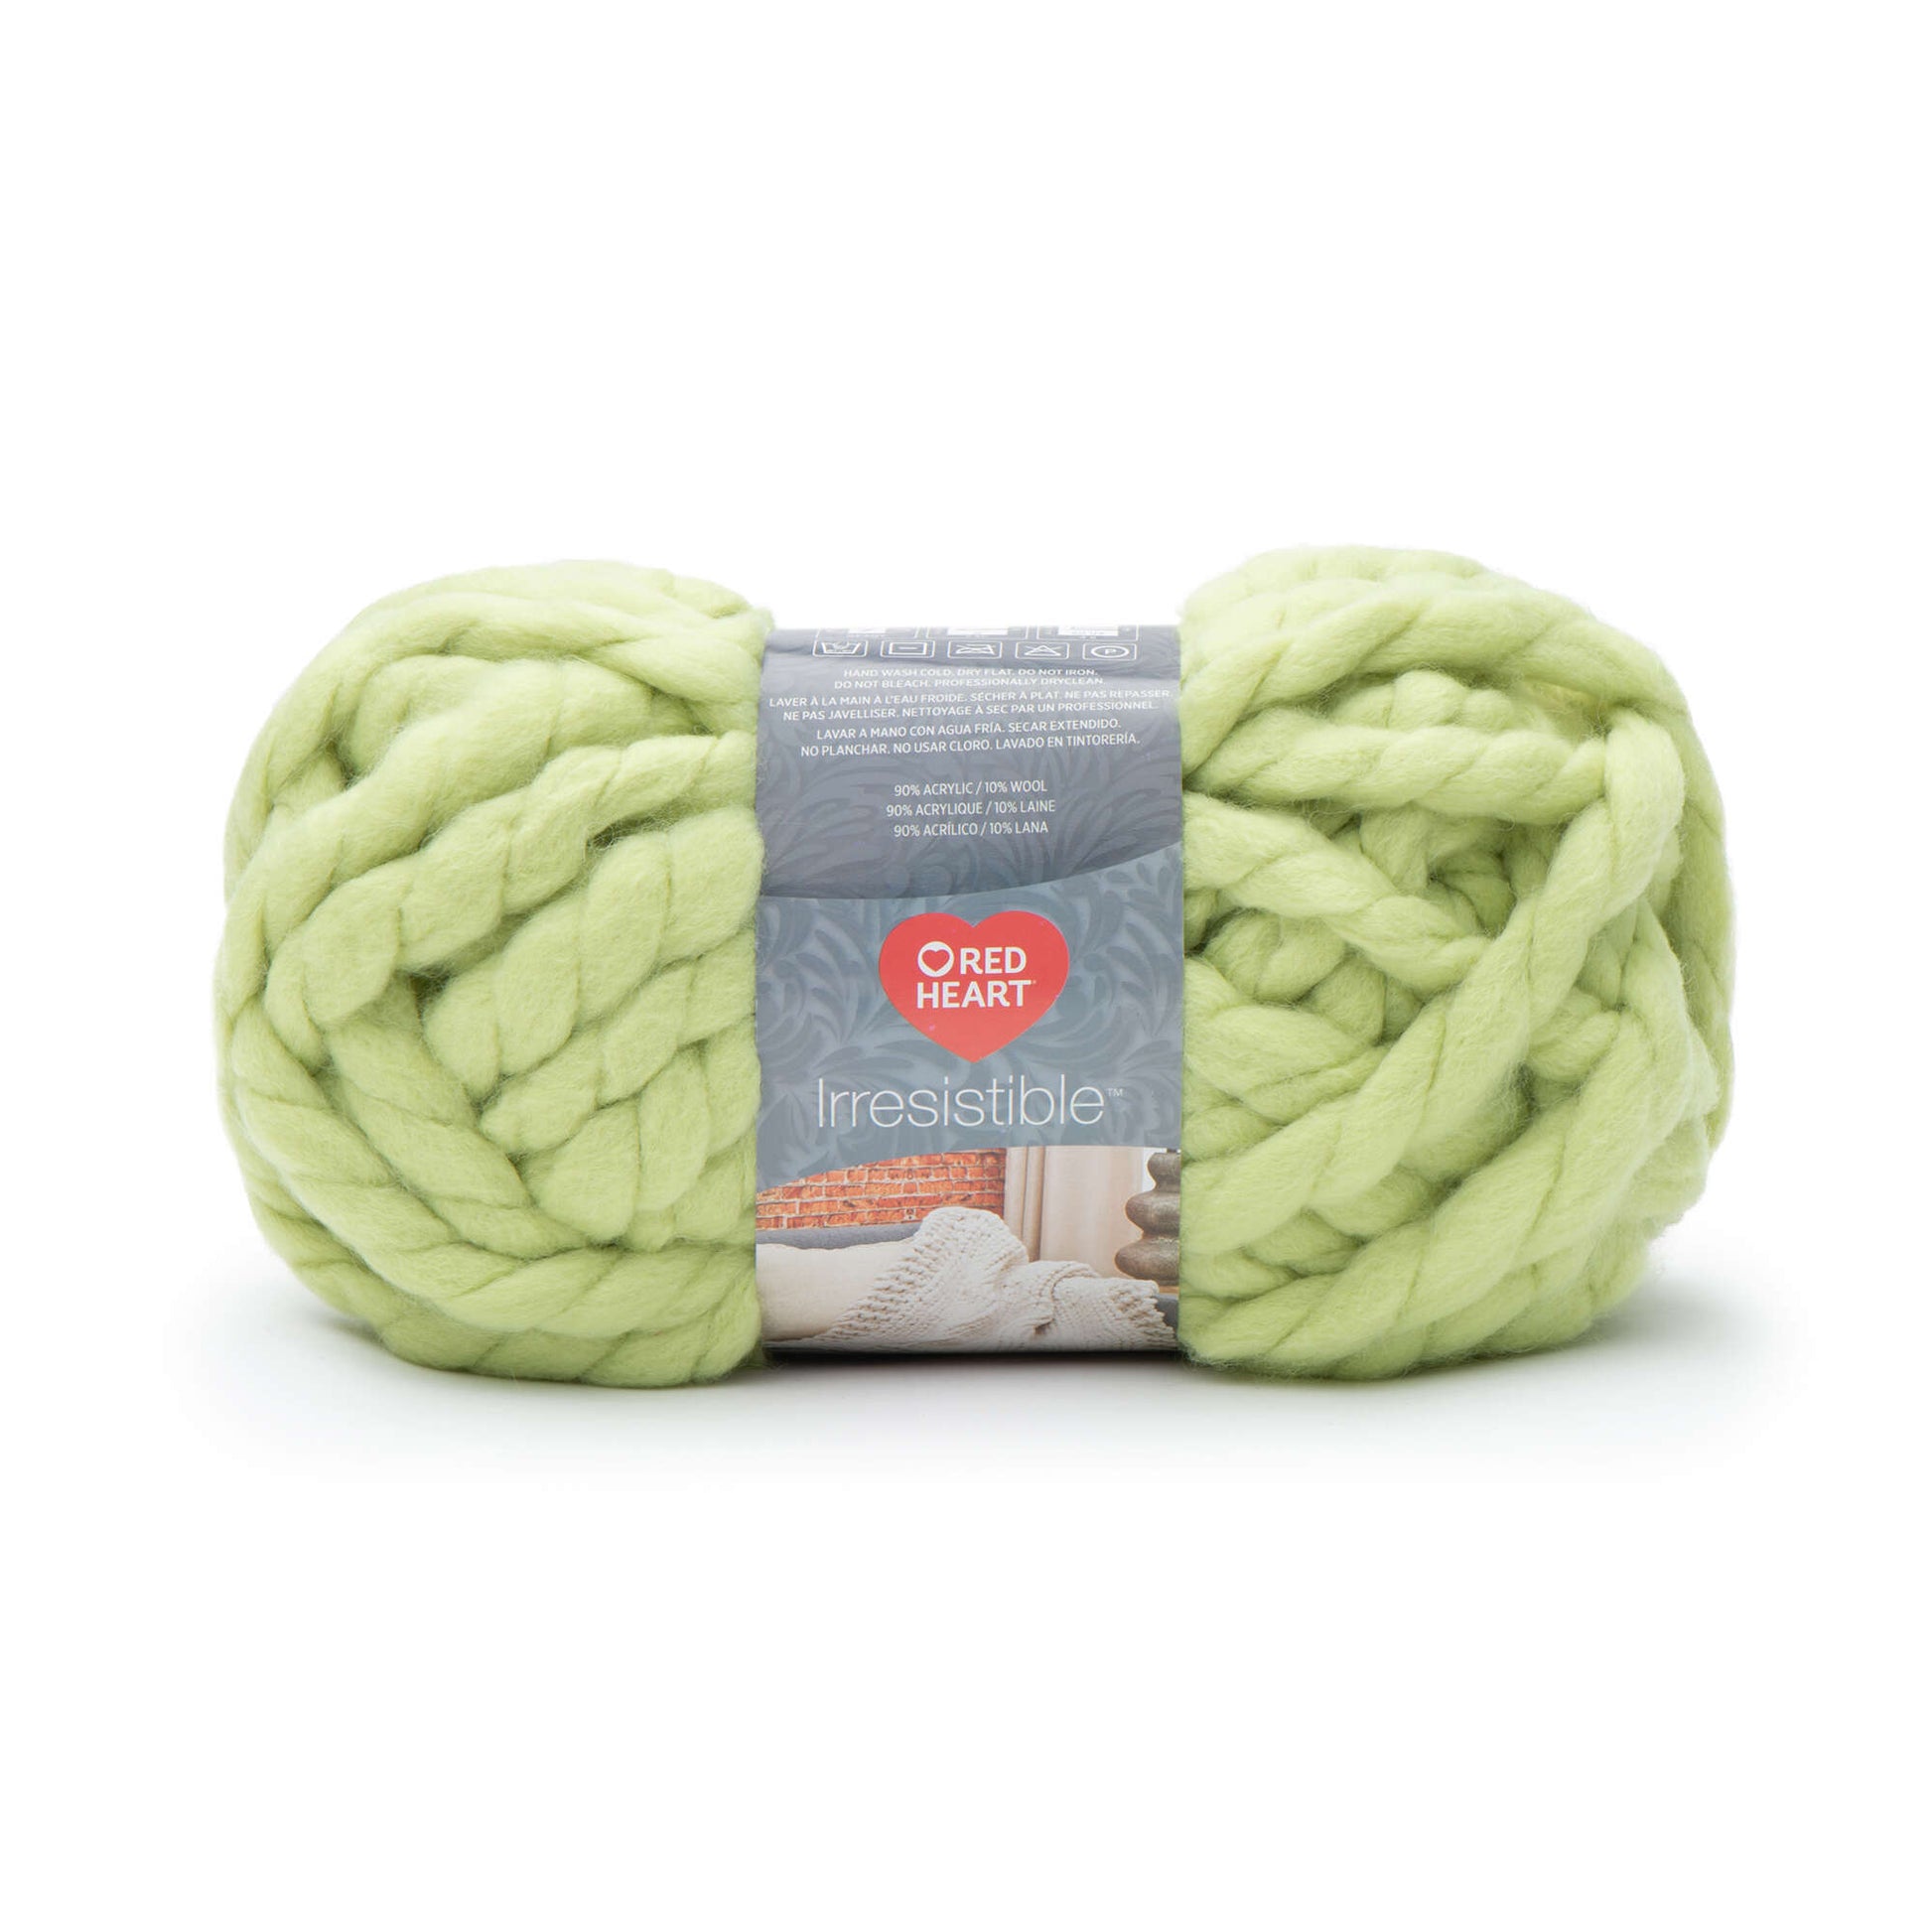 Red Heart Irresistible Yarn - Clearance shades Chartreuse